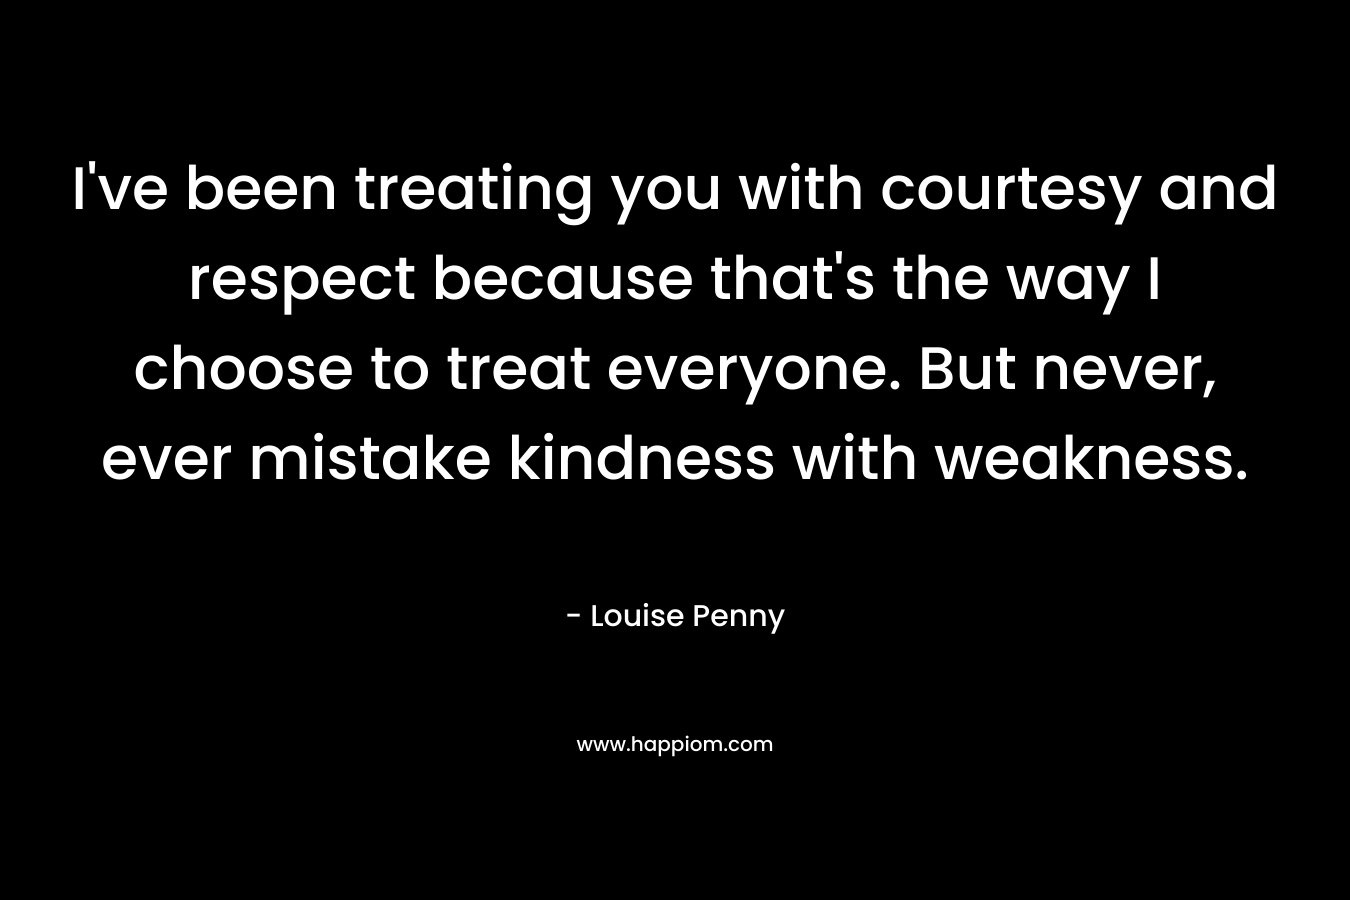 I’ve been treating you with courtesy and respect because that’s the way I choose to treat everyone. But never, ever mistake kindness with weakness. – Louise Penny